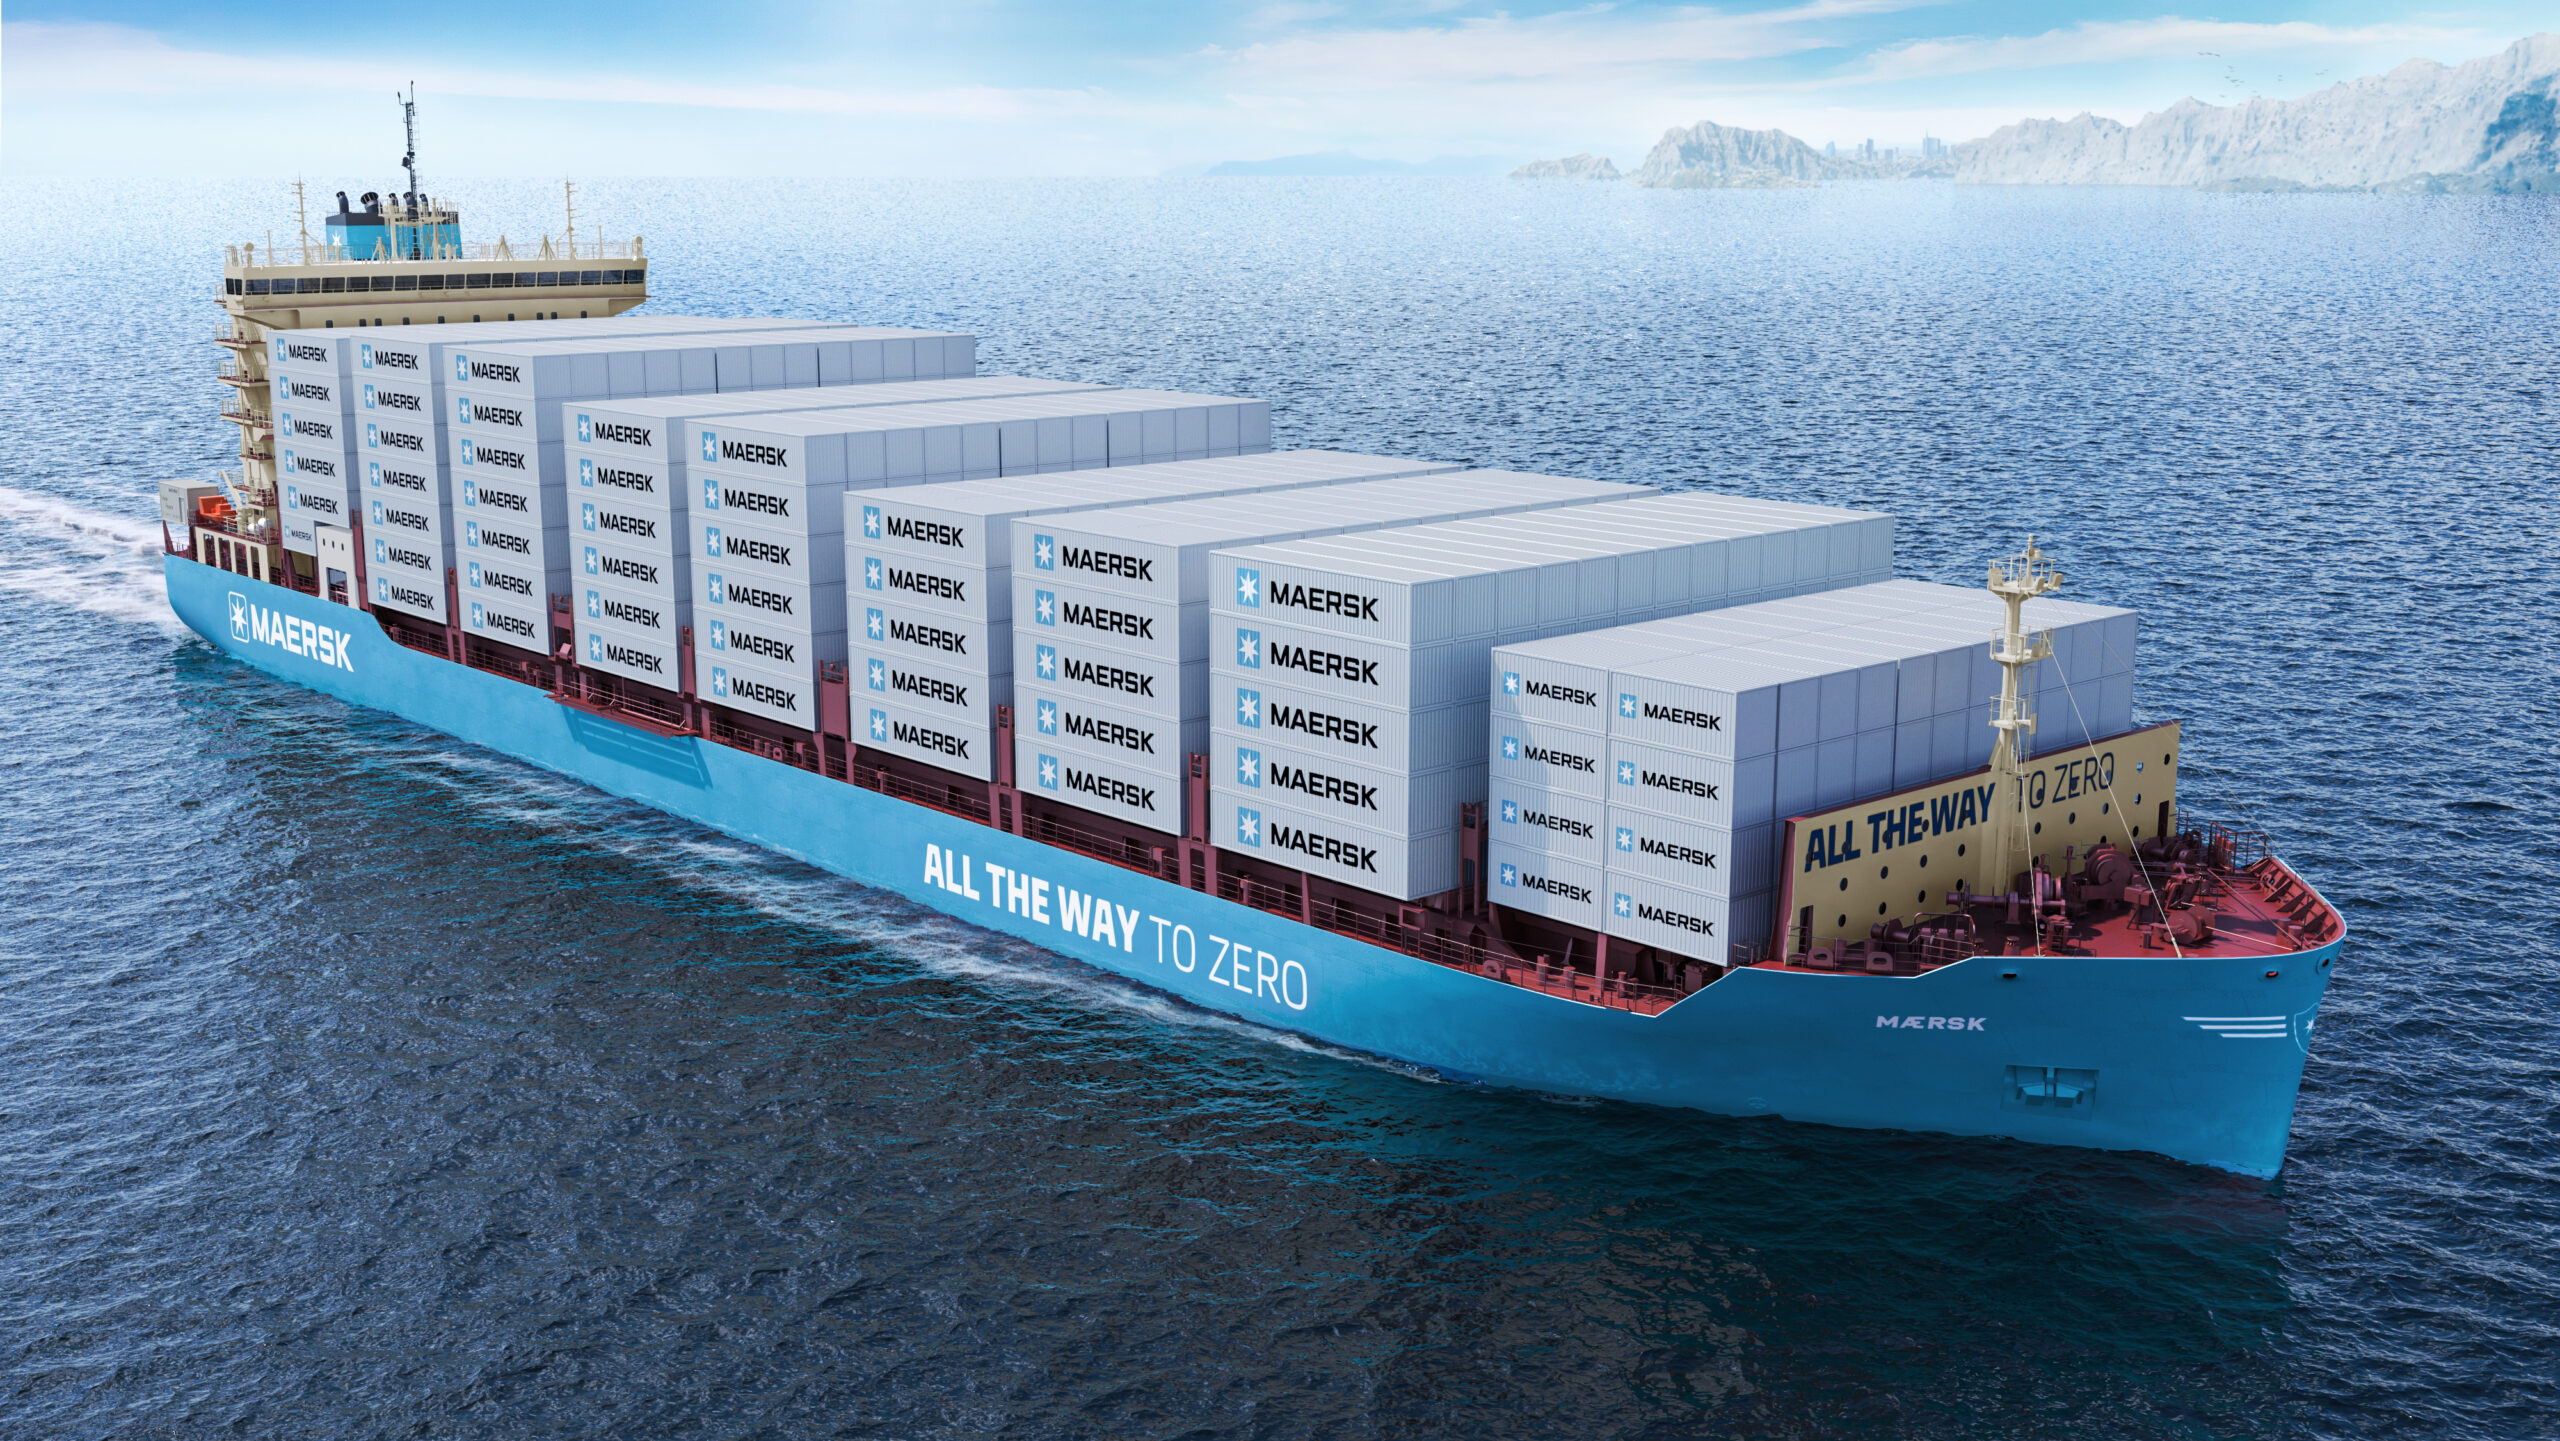 OCI Global fuels first ever green methanol powered container vessel